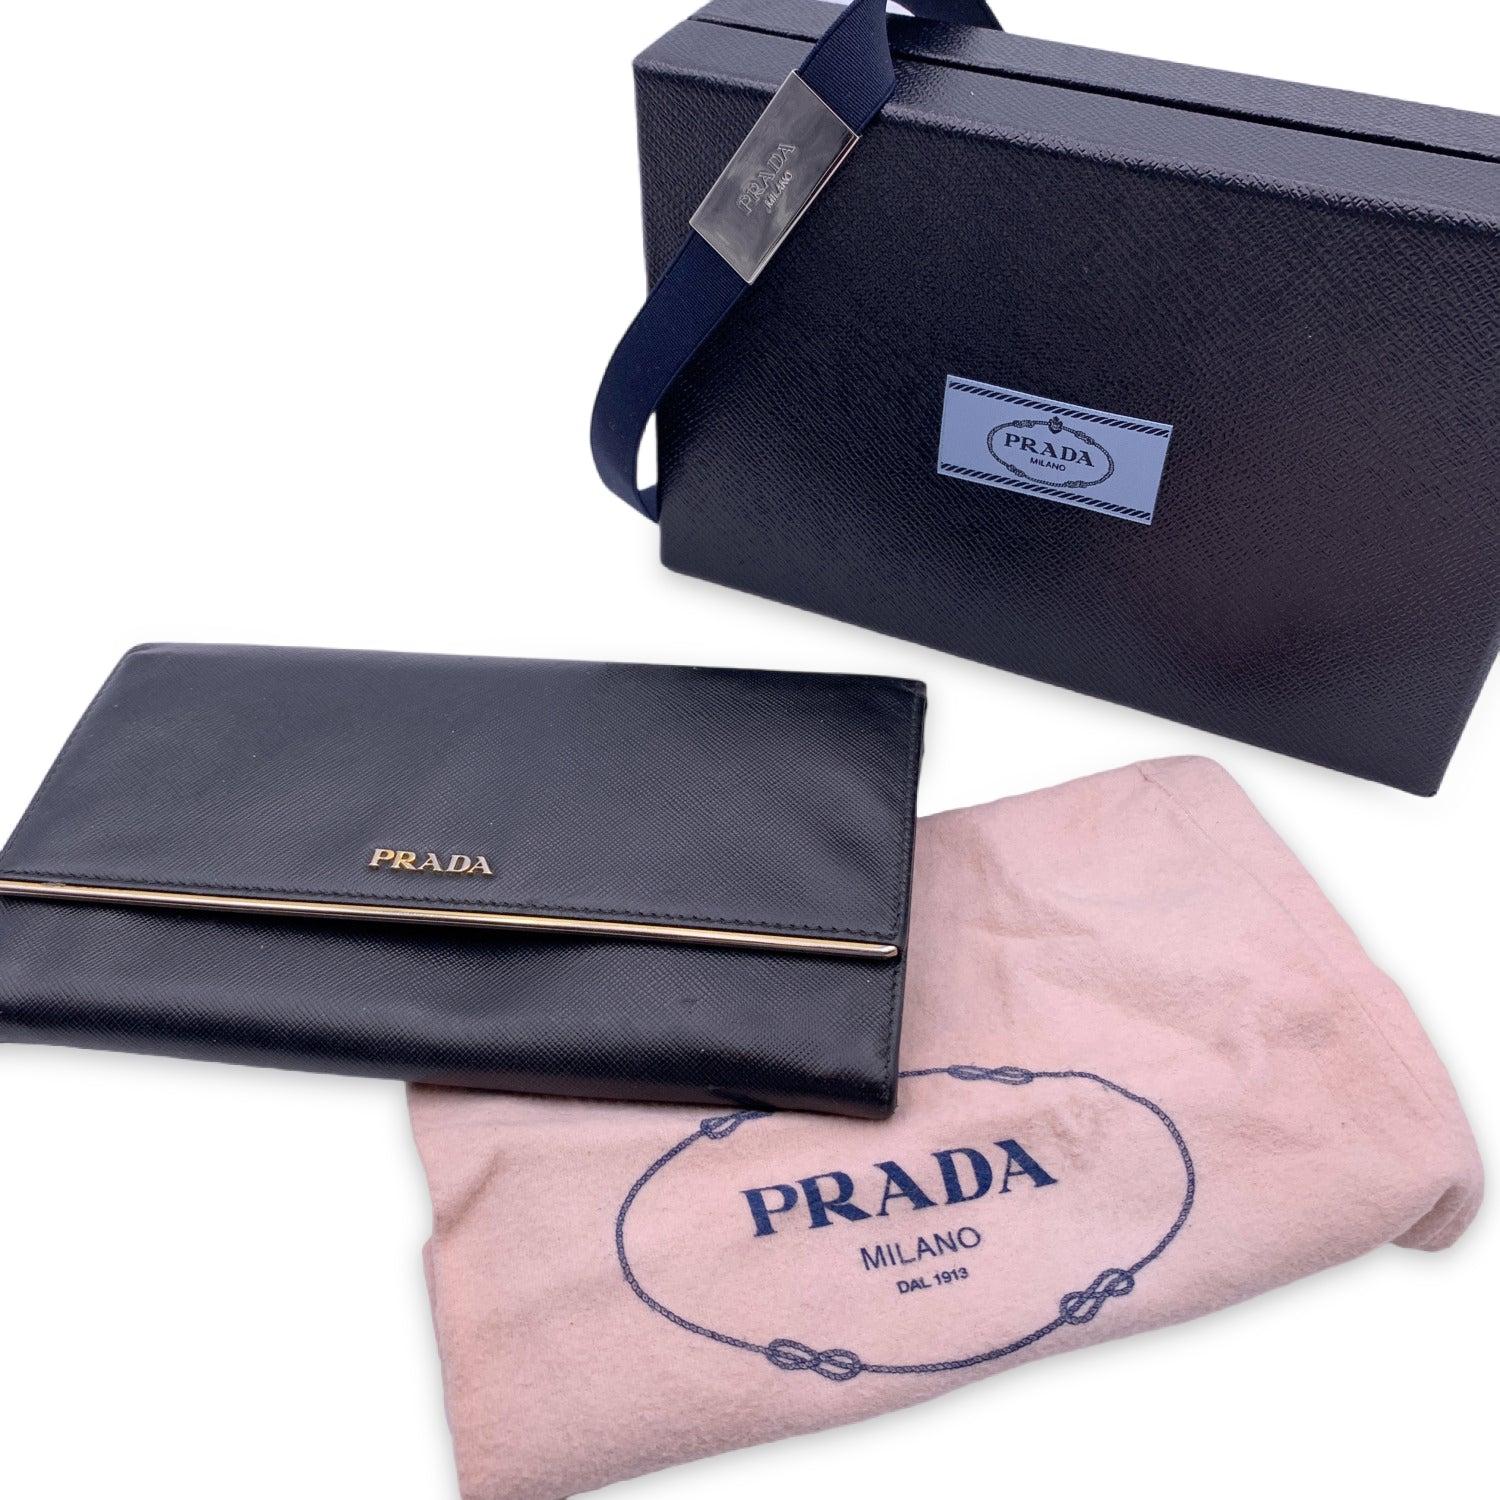 This beautiful Bag will come with a Certificate of Authenticity provided by Entrupy. The certificate will be provided at no further cost. Prada black Saffiano leather flap large wallet with gold metal bar detail and Pradalogo lettering. The snap